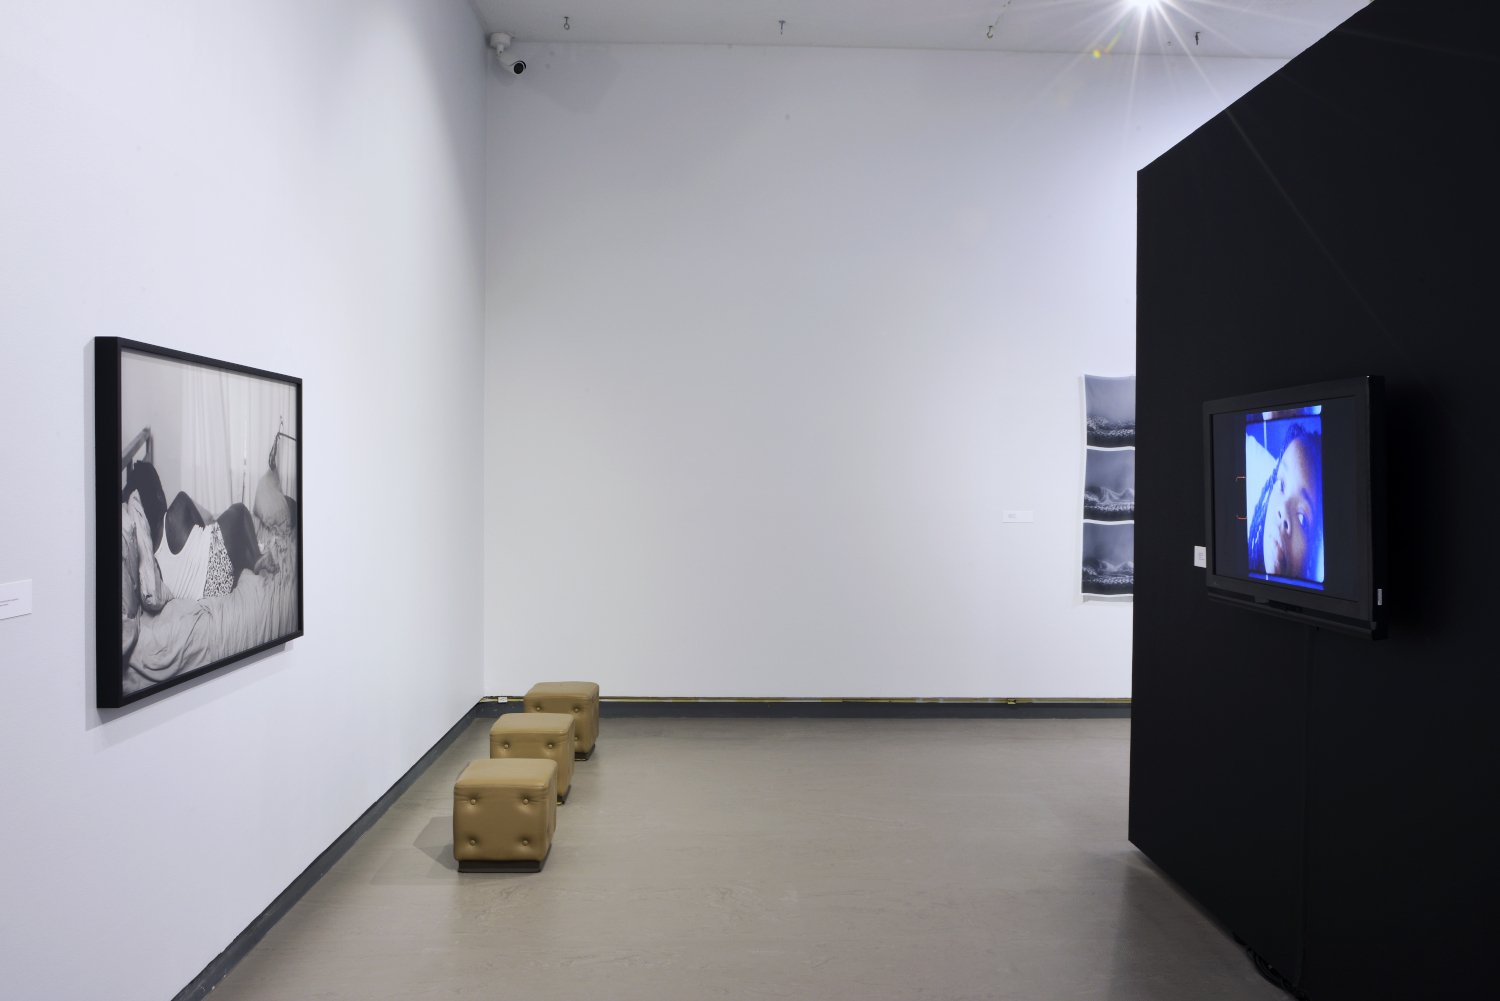  left: Anique Jordan, These Times, 2019, archival print on hahnemuhle photo rag baryta. Courtesy of Patel Brown Gallery. Image by Don Hall.  right: Kourtney Jackson, Wash Day, 2020, film, 9m 52s. Collection of the artist.  